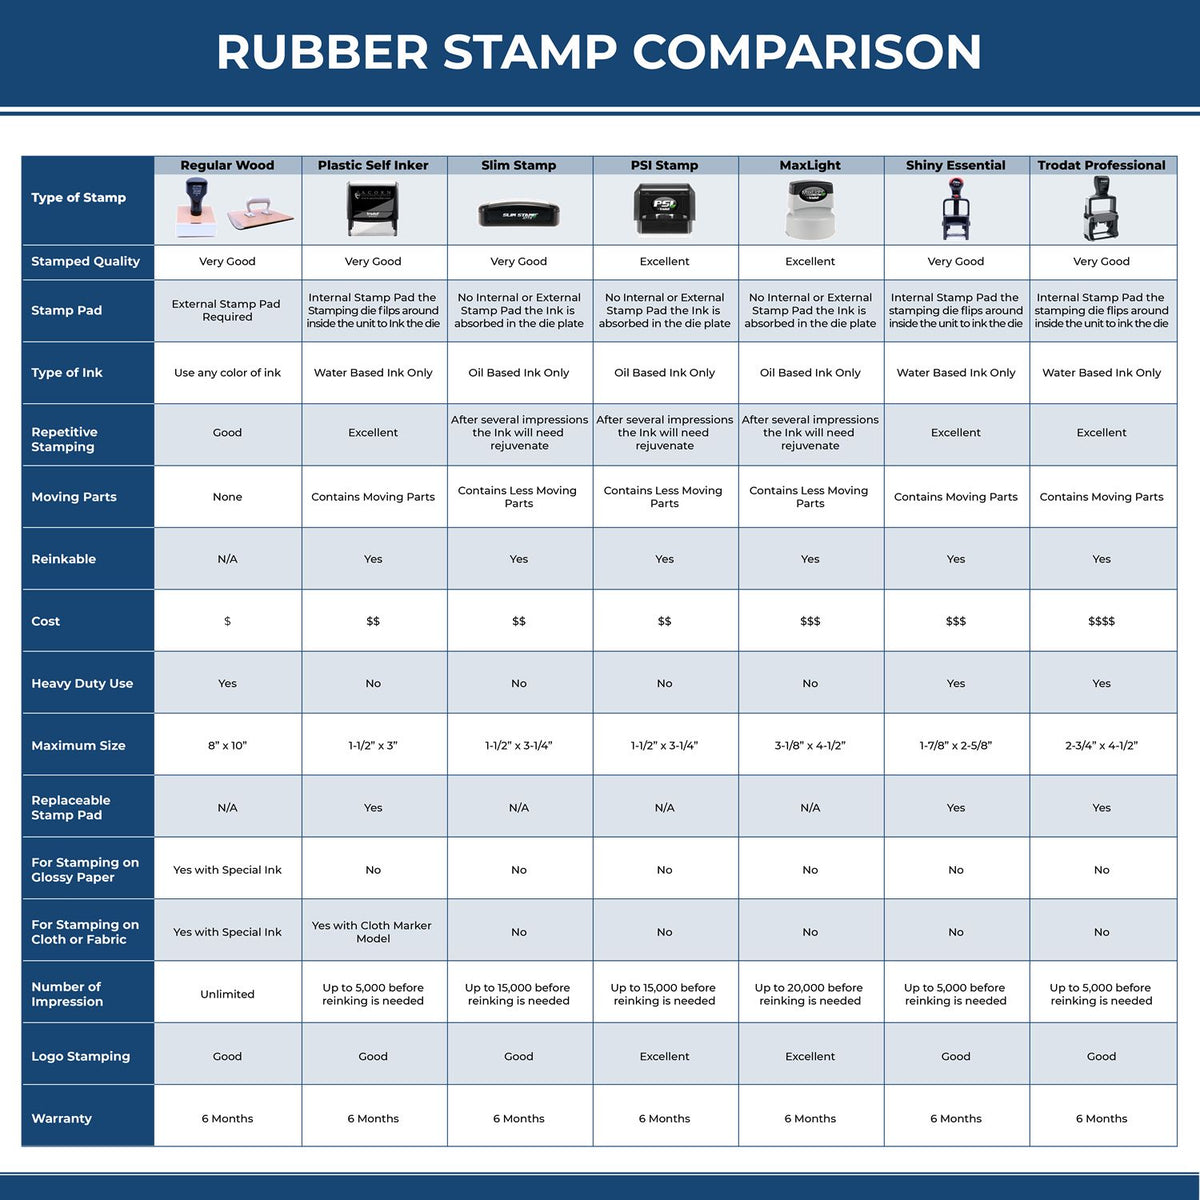 A comparison chart for the different types of mount models available for the Super Slim New Hampshire Notary Public Stamp.